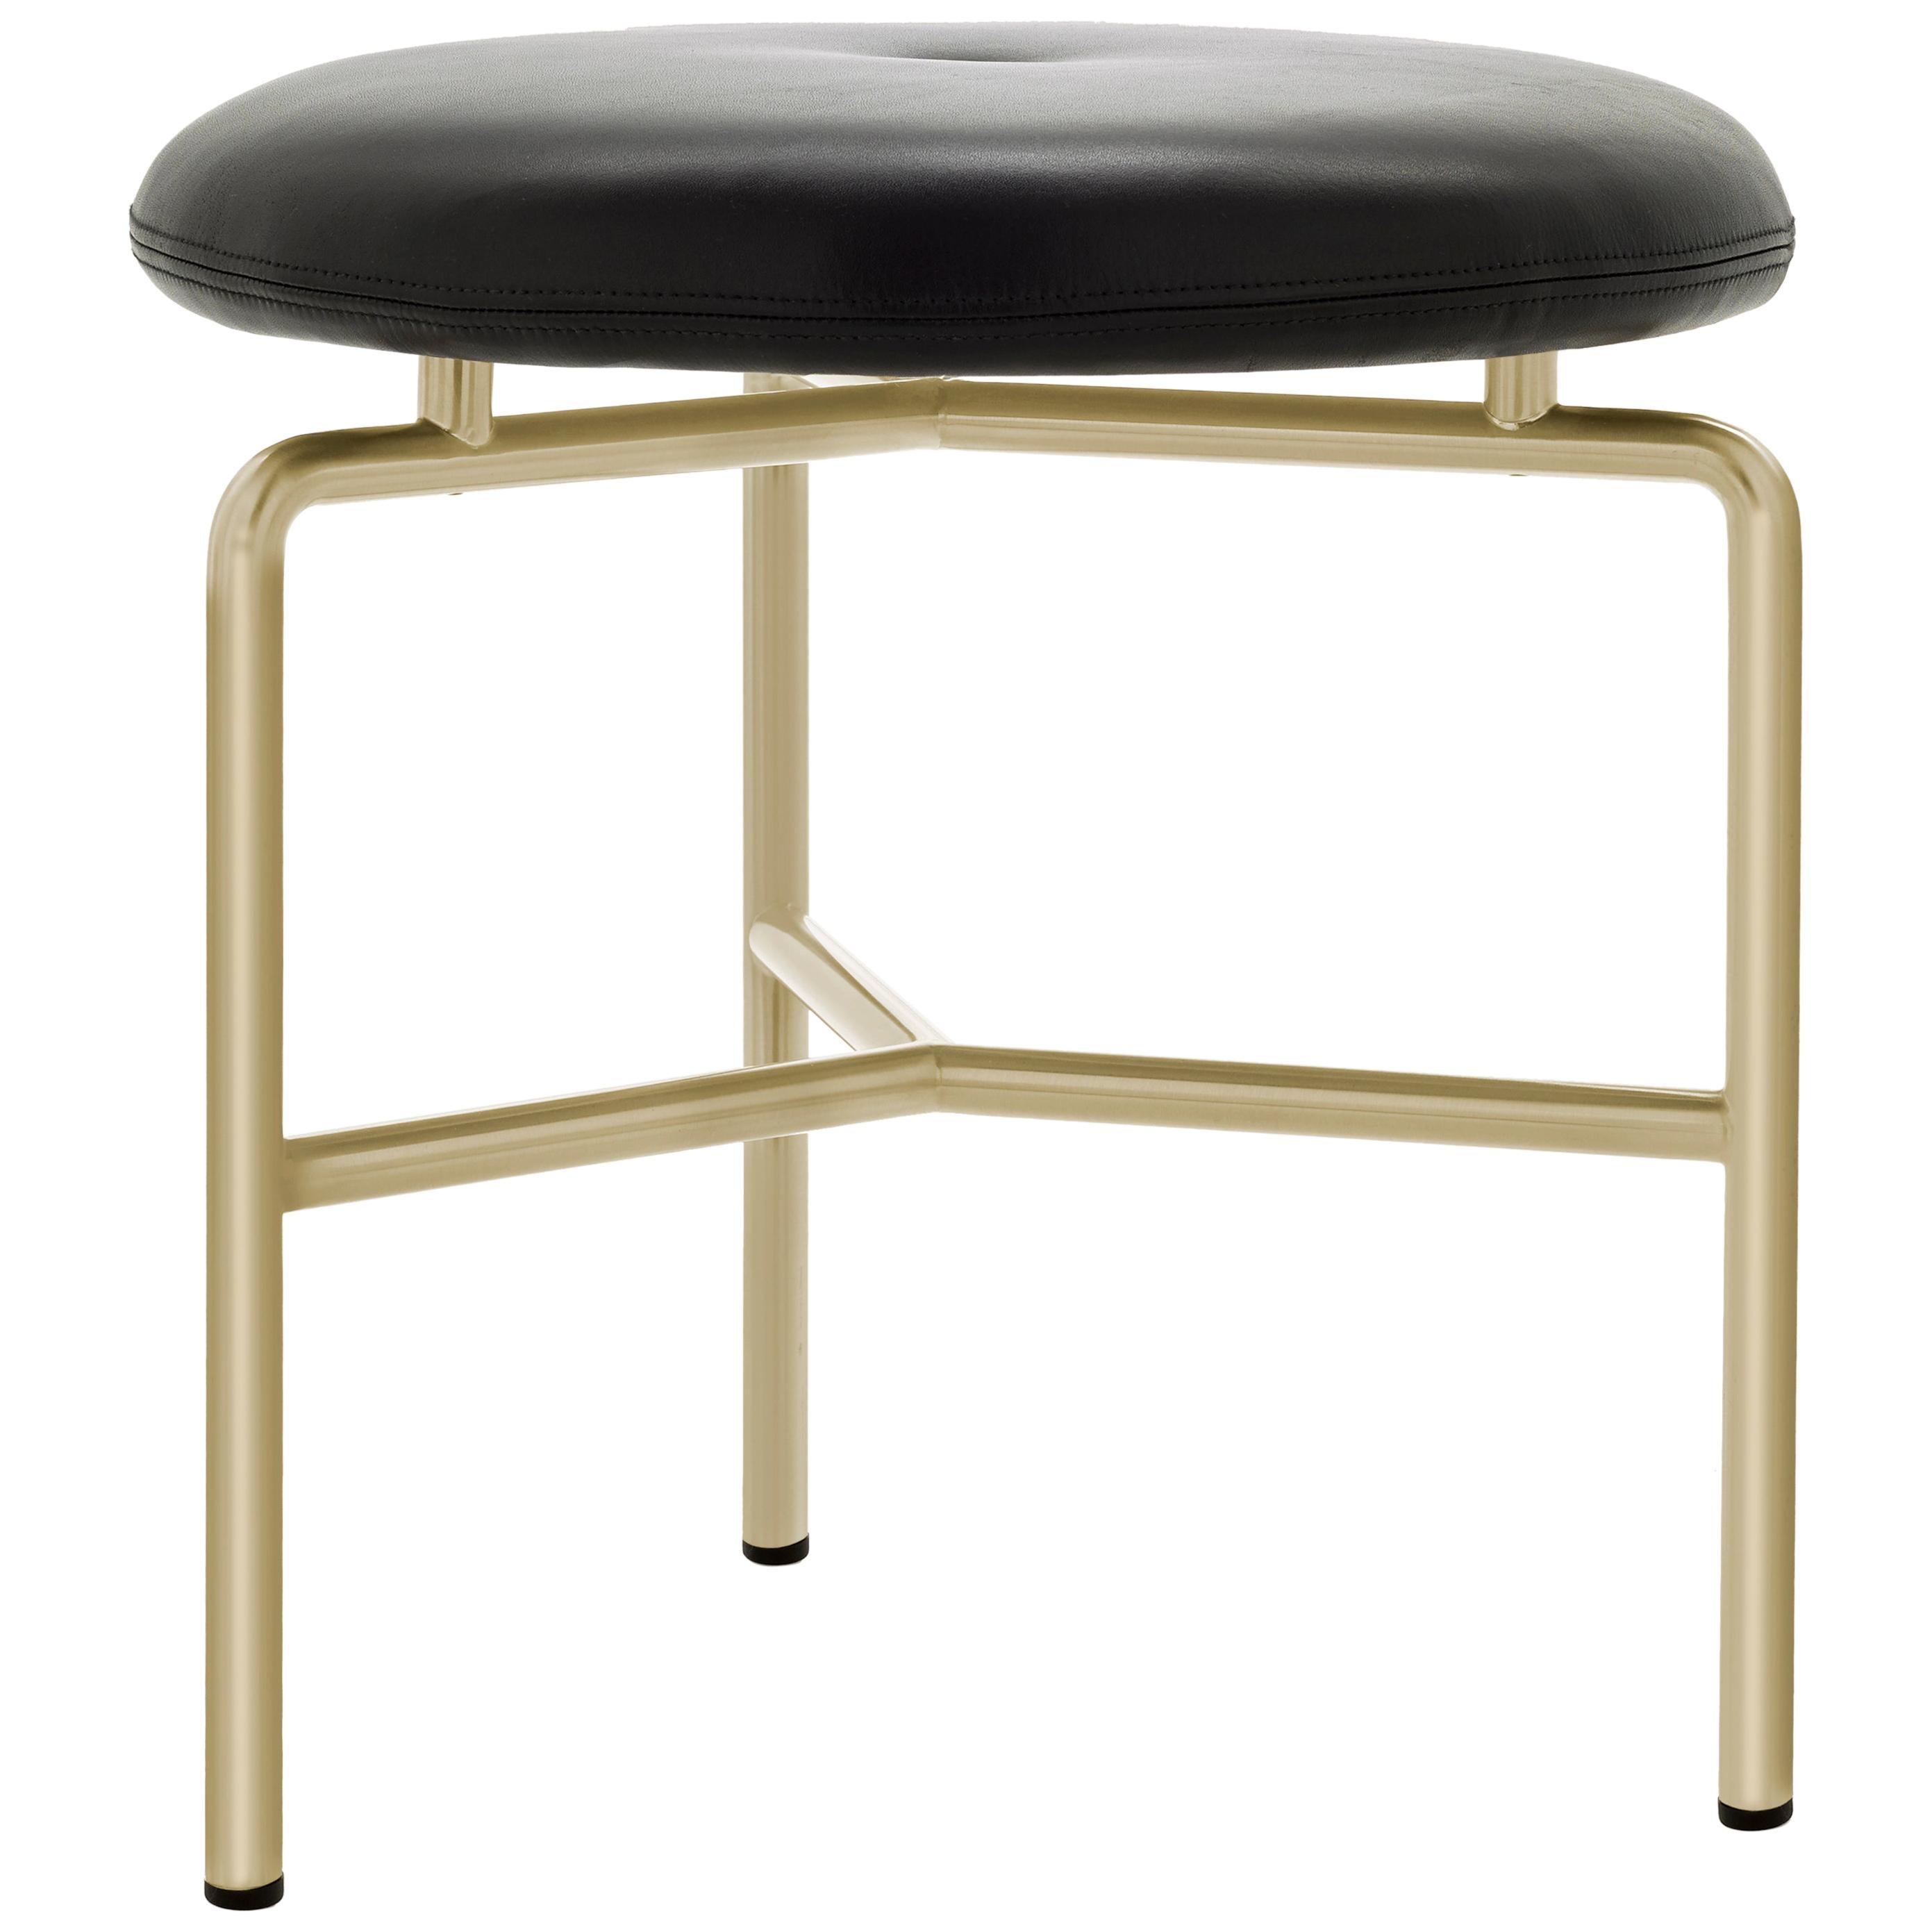 For Sale: Black (Elegant 99001 Black) Circular Stool in Satin Brass and Leather Designed by Craig Bassam